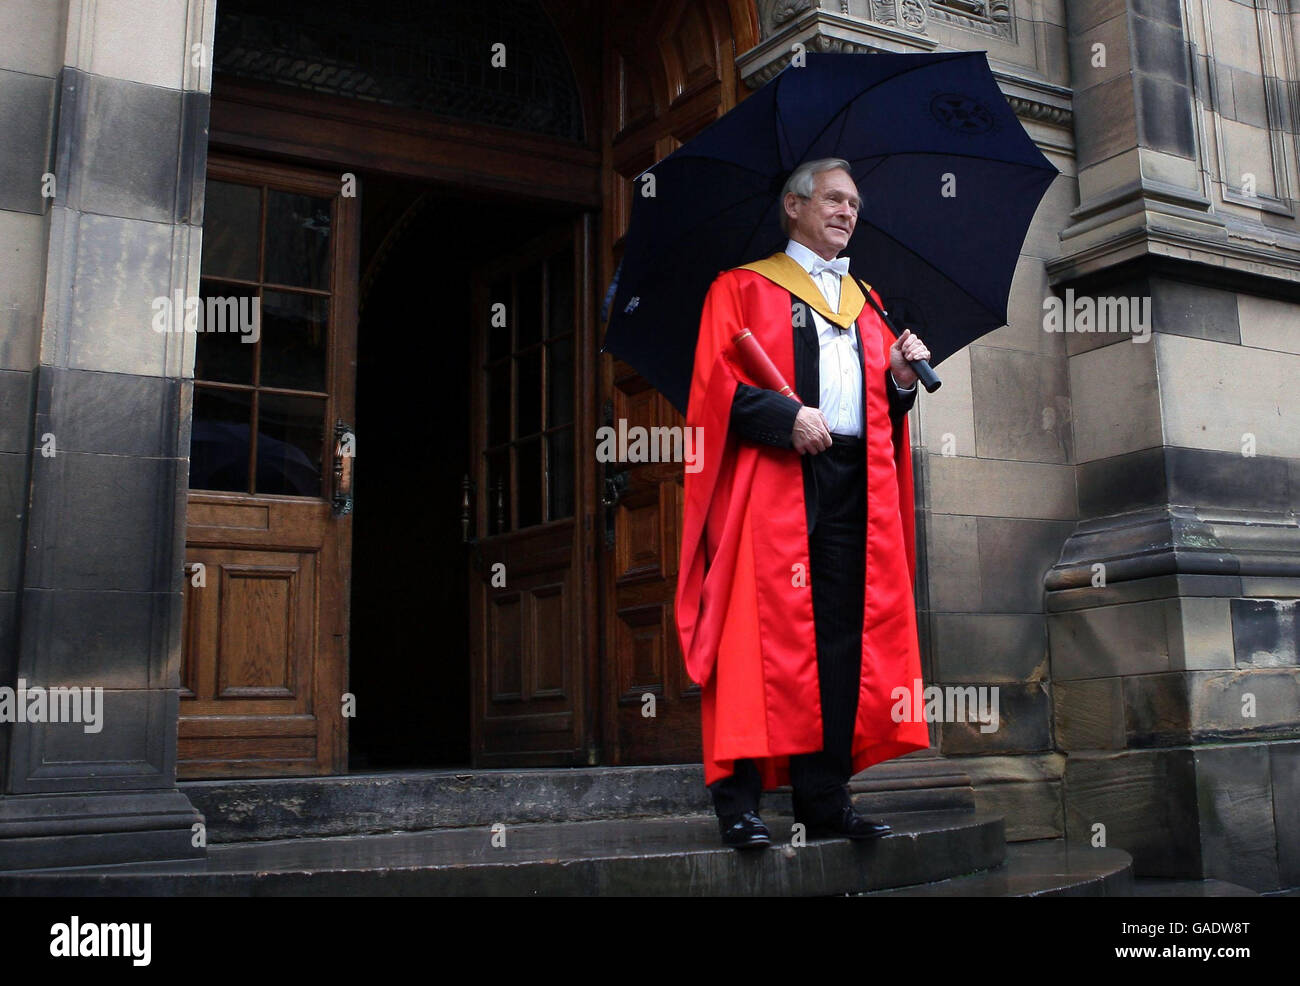 George Reid, PC, Former Member and Presiding Officer of the Scottish Parliament, pictured after being awarded an Honorary Degree of Doctor honoris causa at the University of Edinburgh. Stock Photo